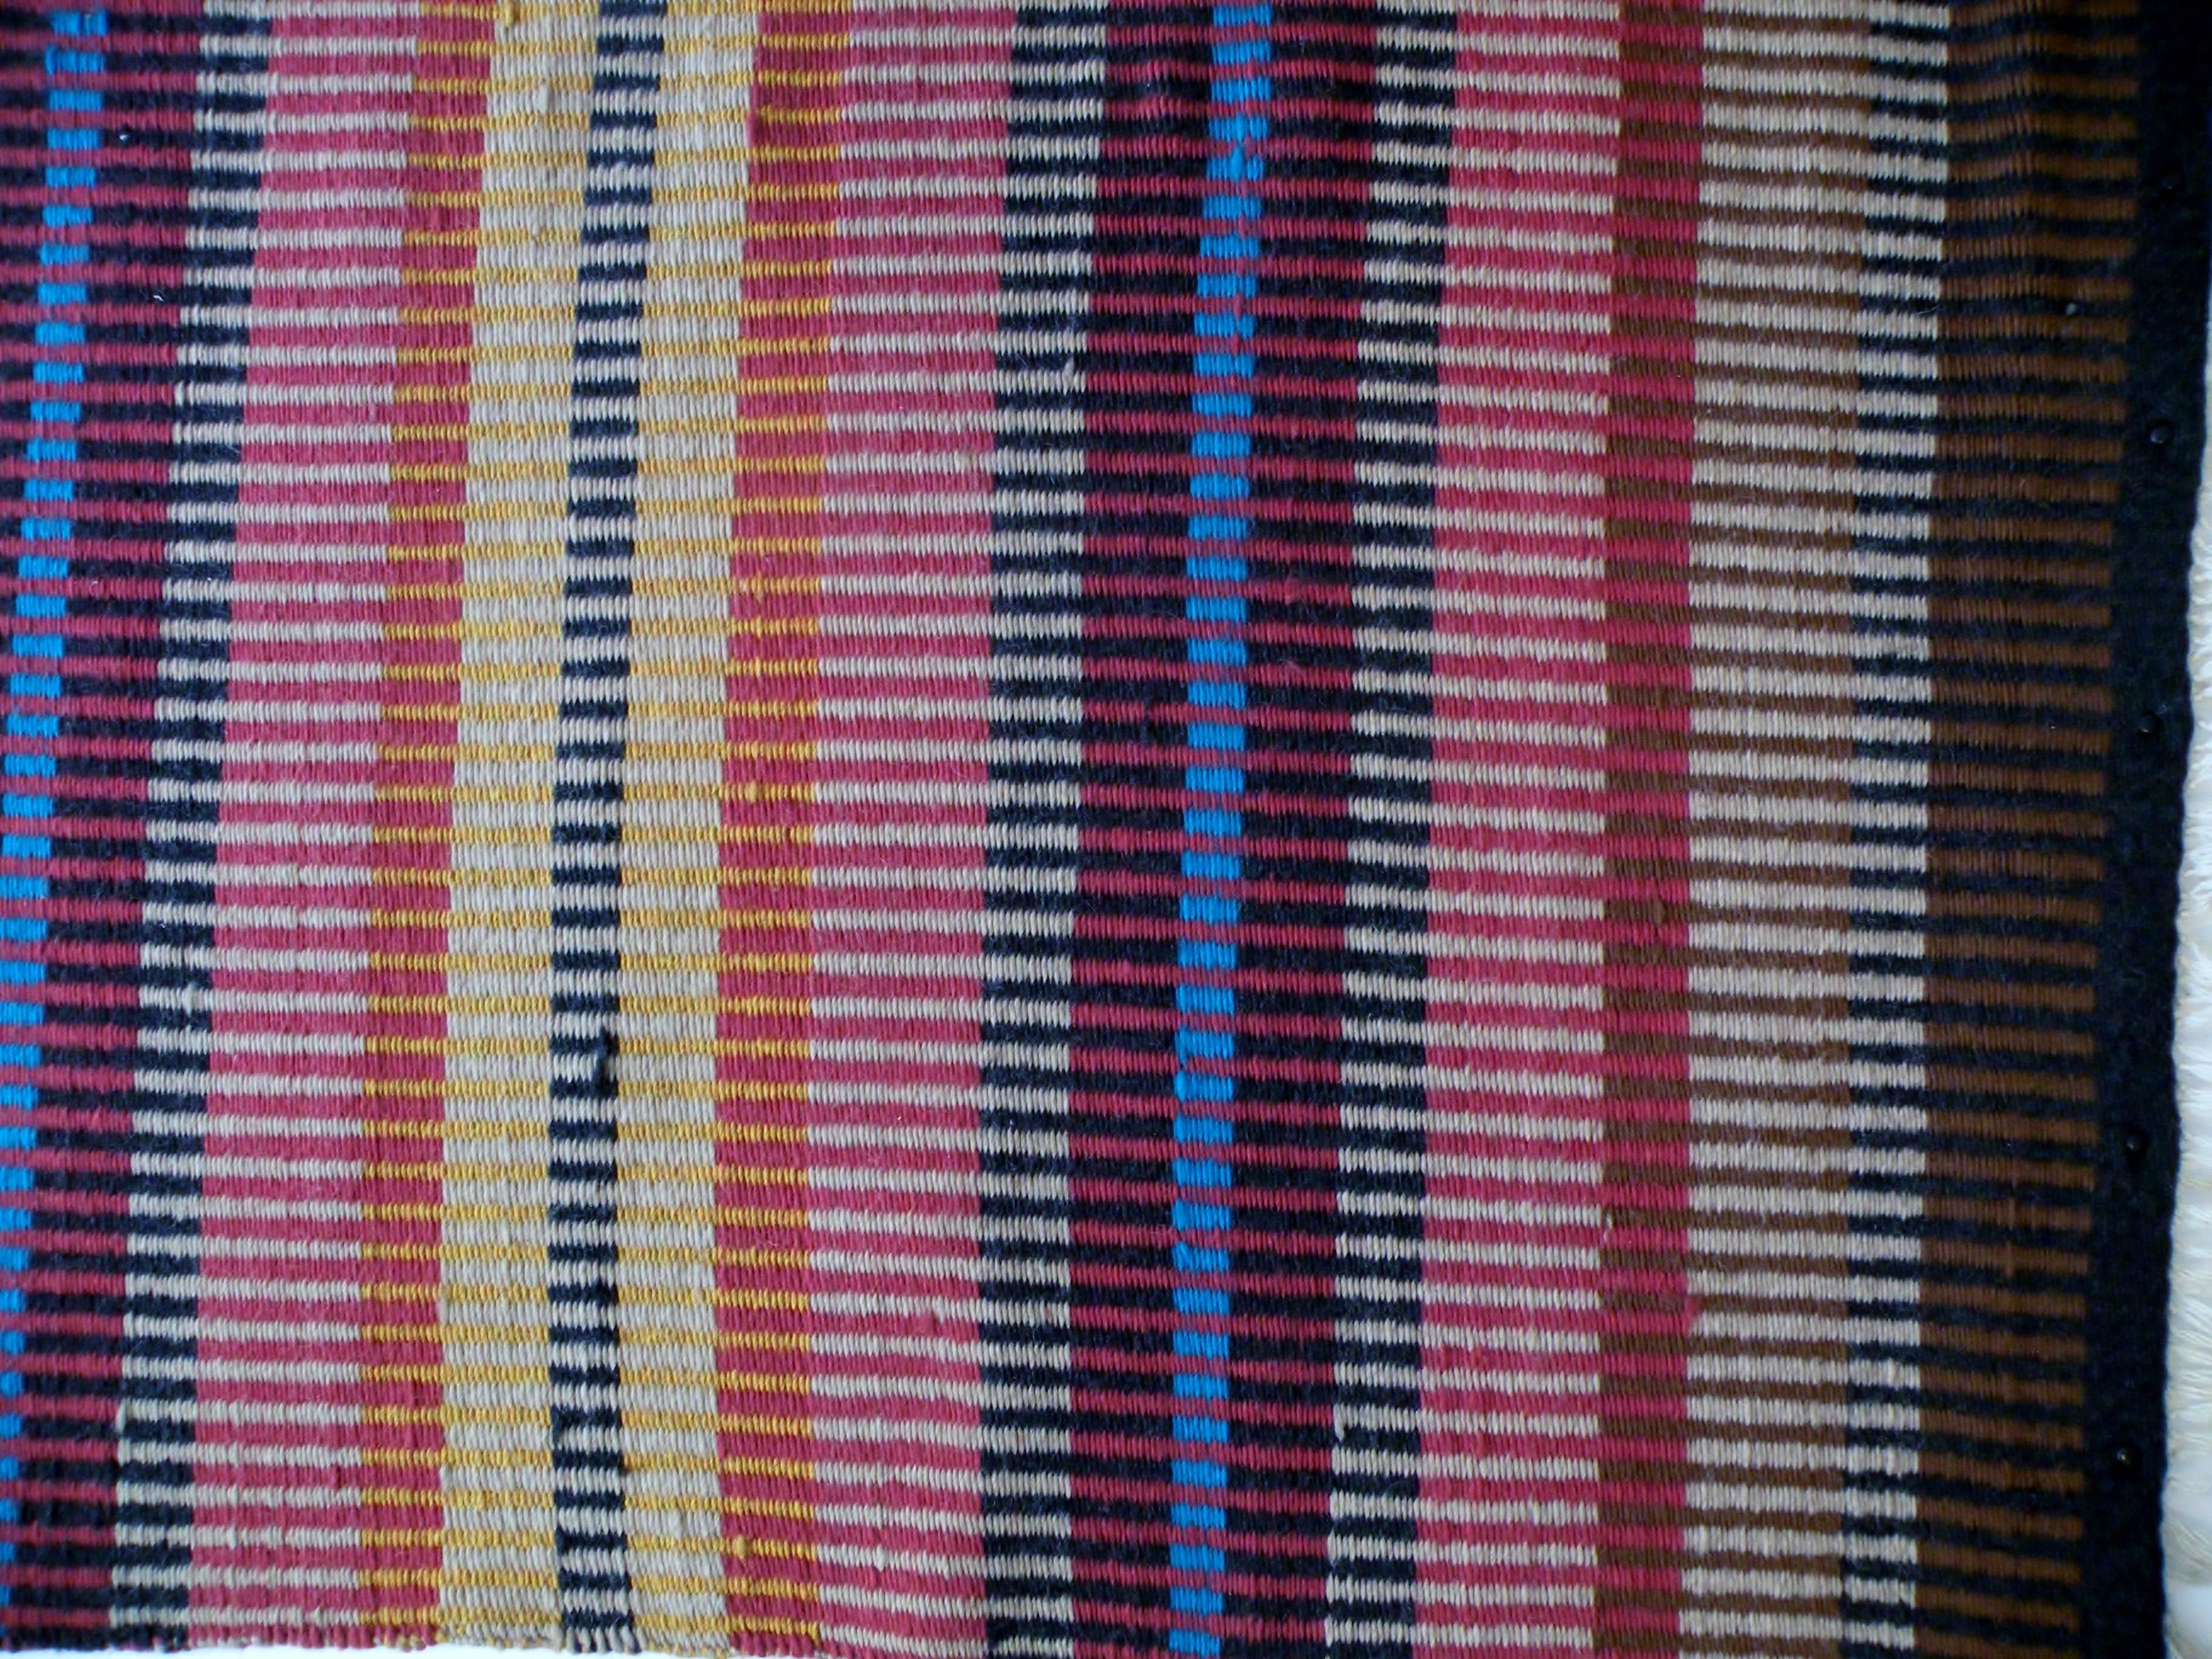 American Craftsman California Craft Linear Abstract Woven Textile Bauhaus Inspired Rug